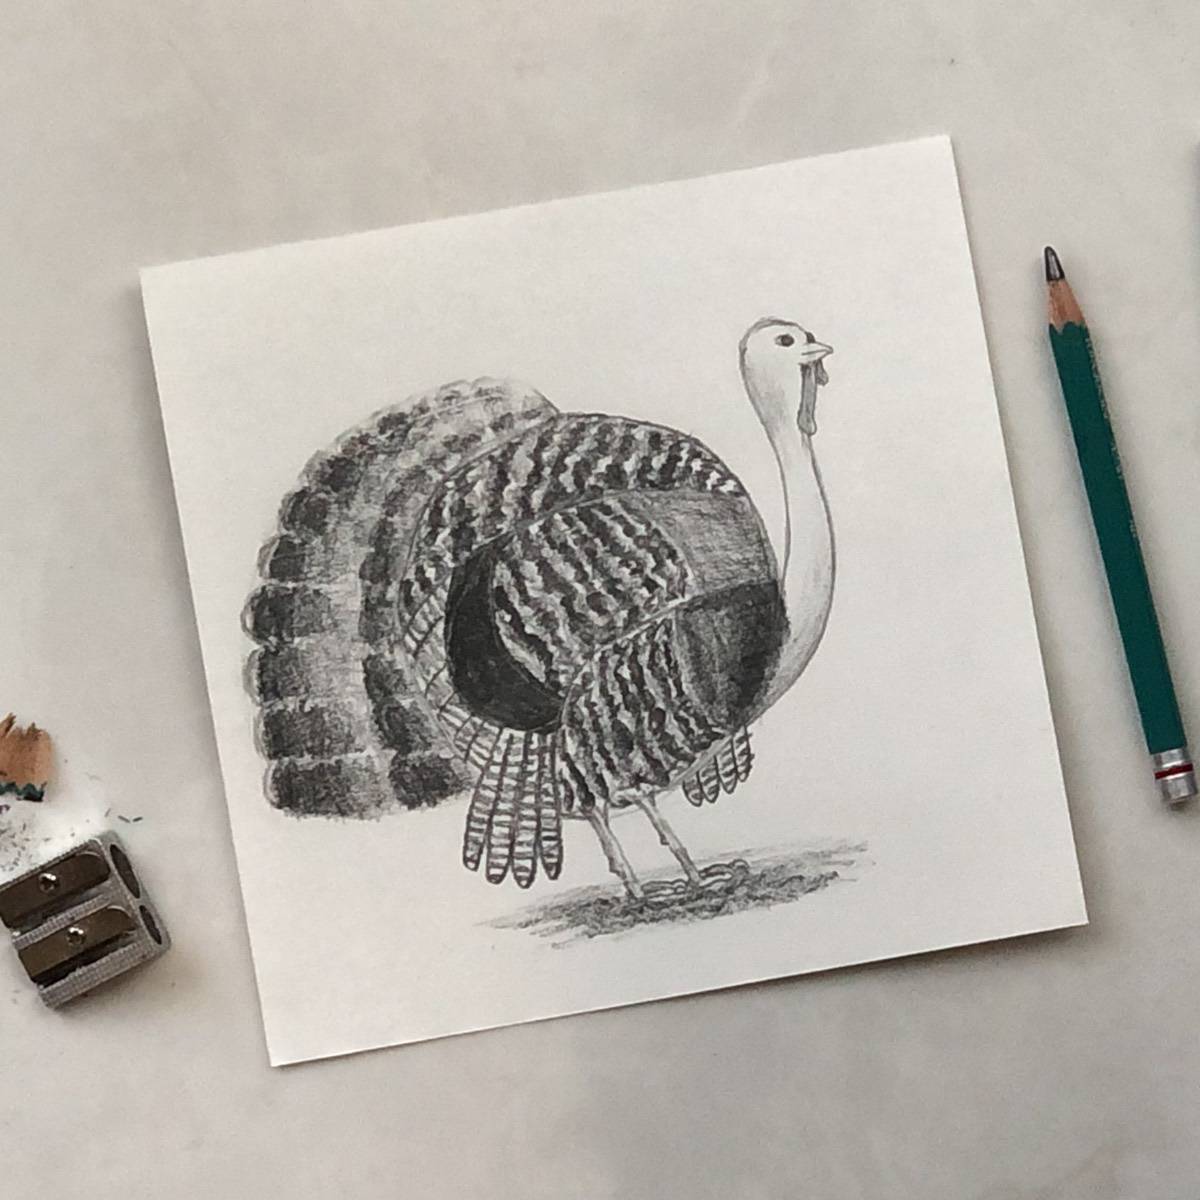 Pencil drawing of a realistic turkey with a drawing pencil and a pencil sharpener.